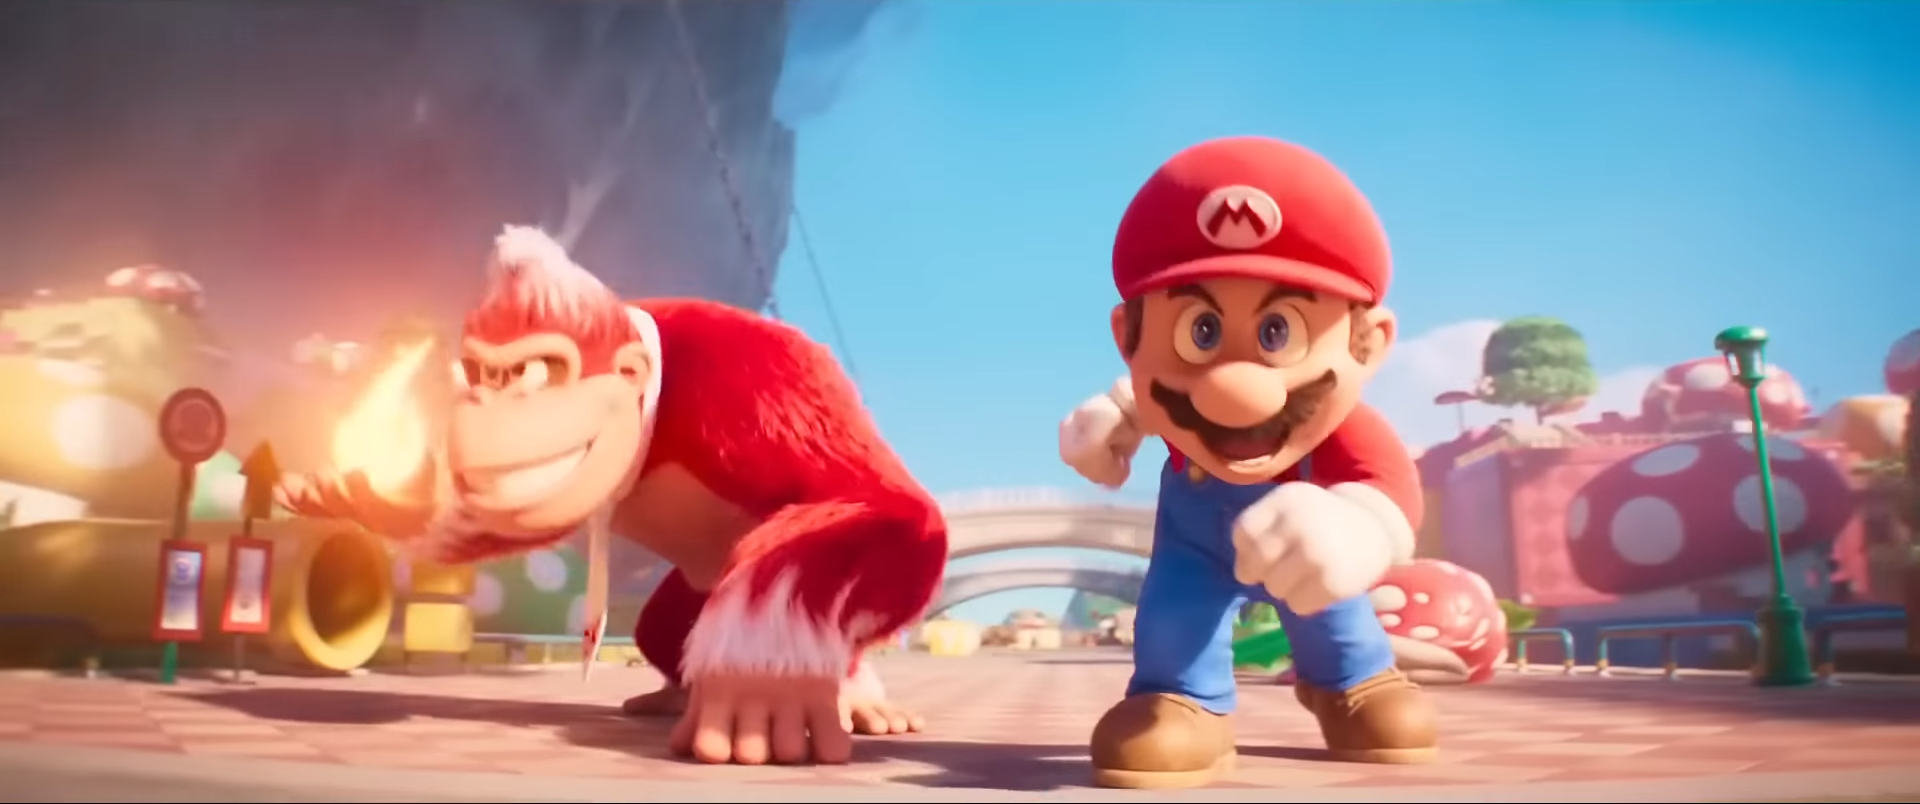 The Super Mario Bros. Movie' includes the 'DK Rap' from 'Donkey Kong 64